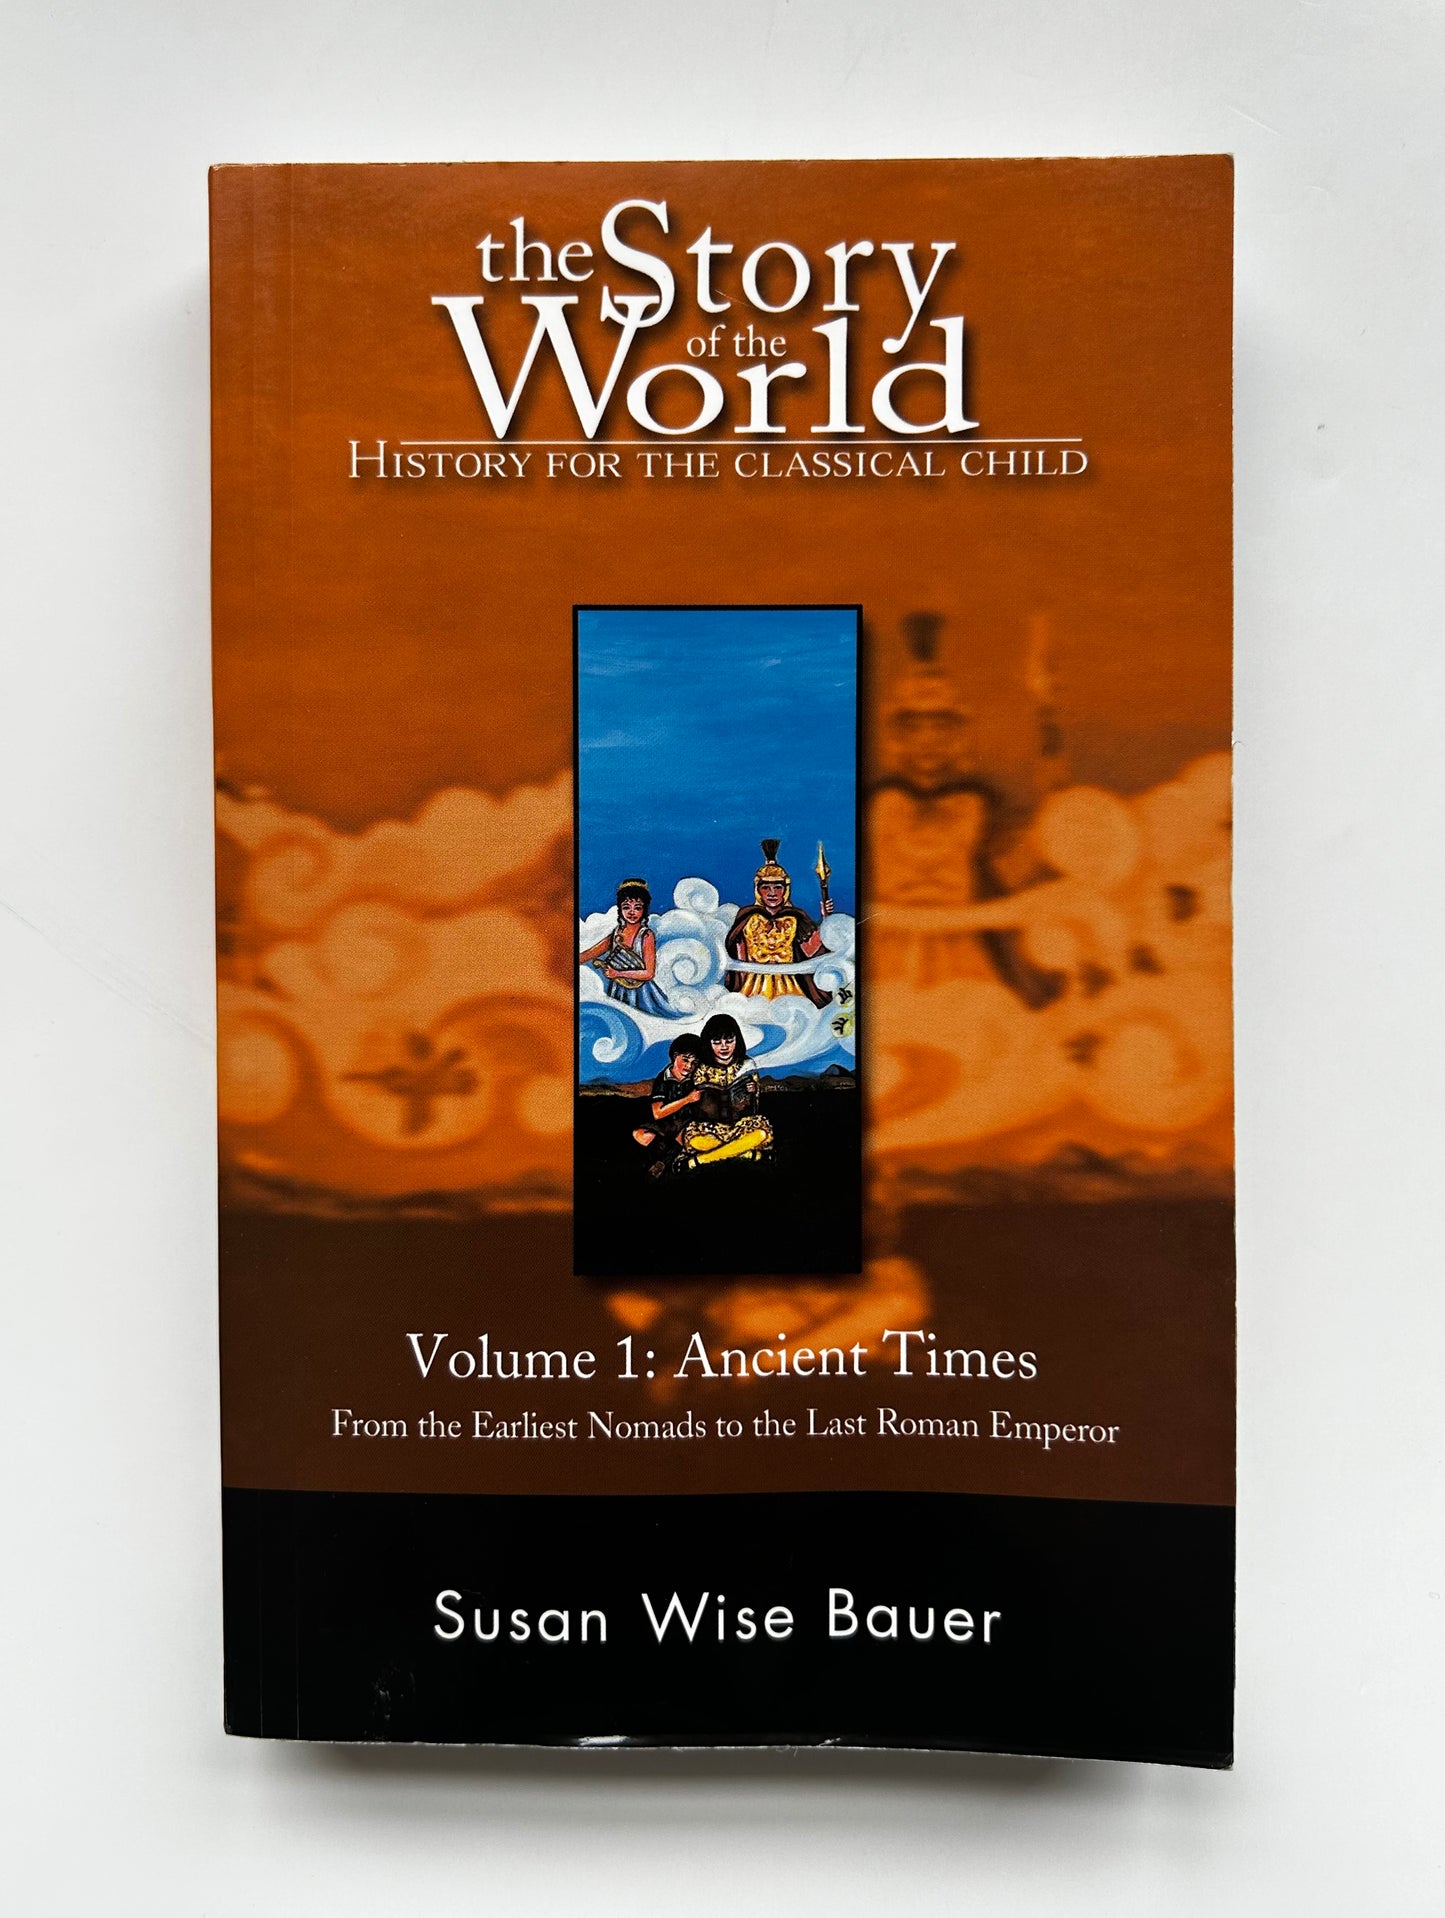 The Story of the World: History for the Classical Child - Volume 1: Ancient Times